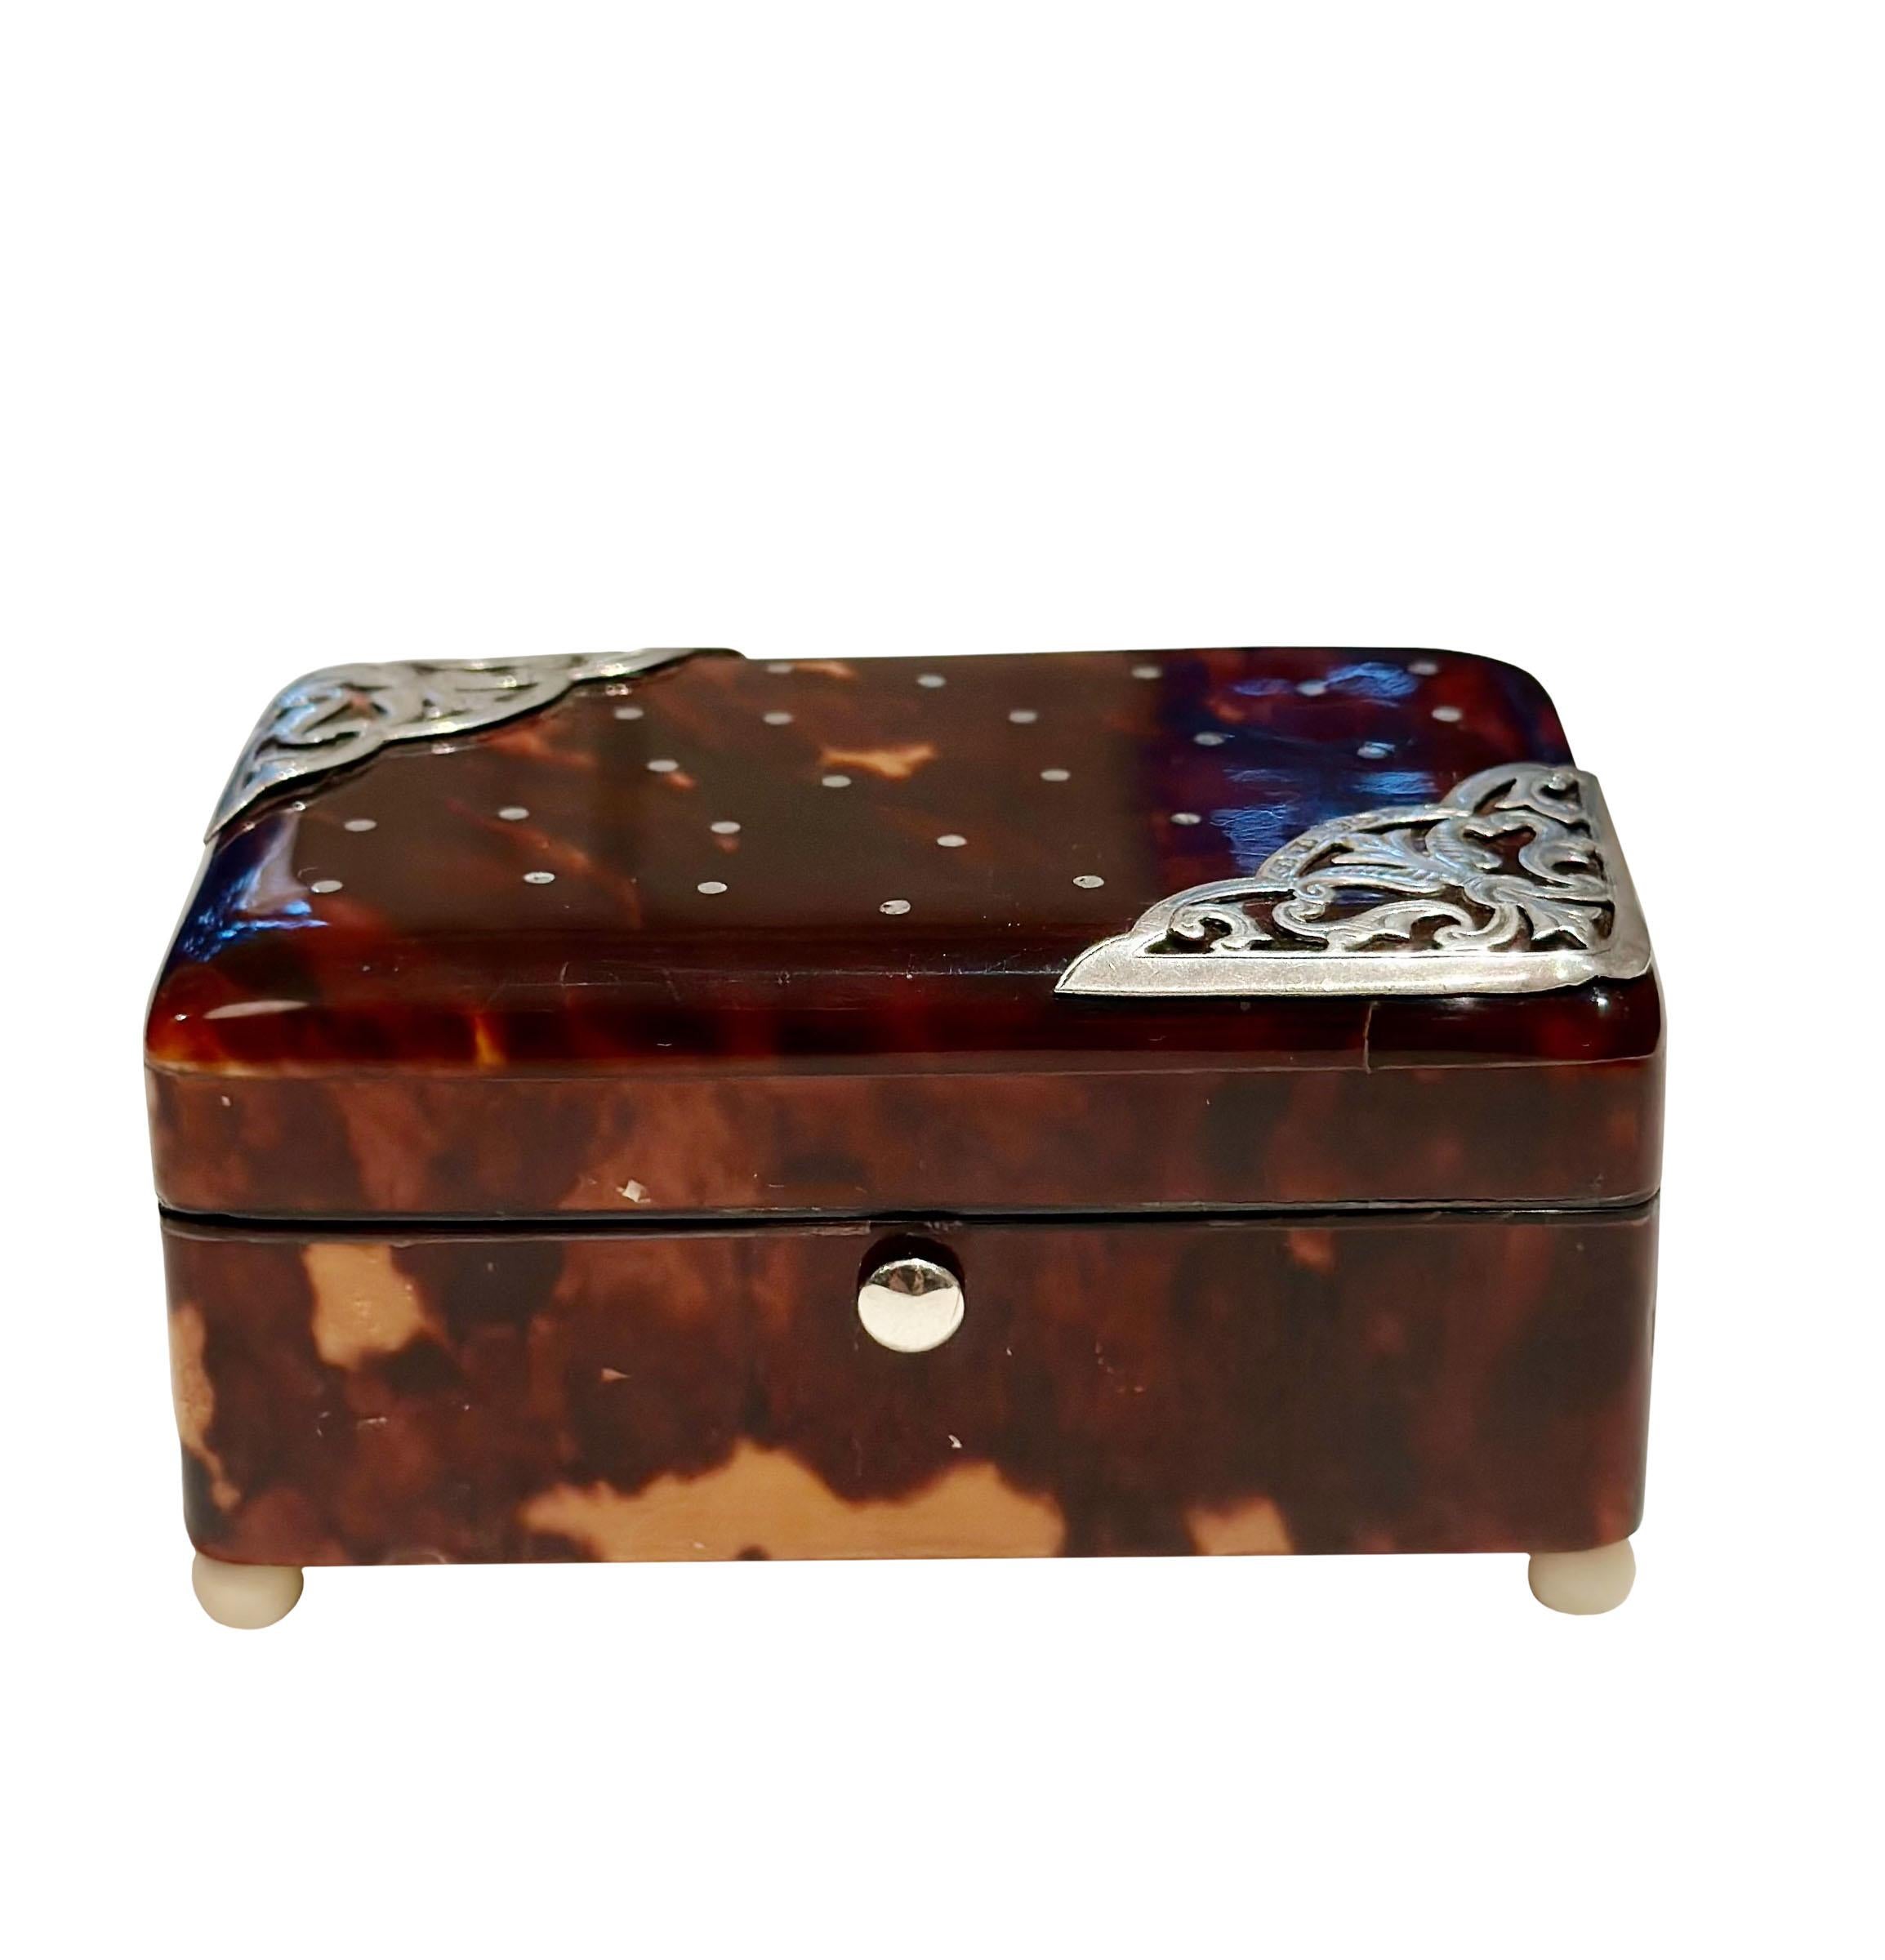 A very attractive tortoiseshell box with silver, on ivory ball feet. English hallmarks on sterling, circa 1880s. The interior has two compartments.